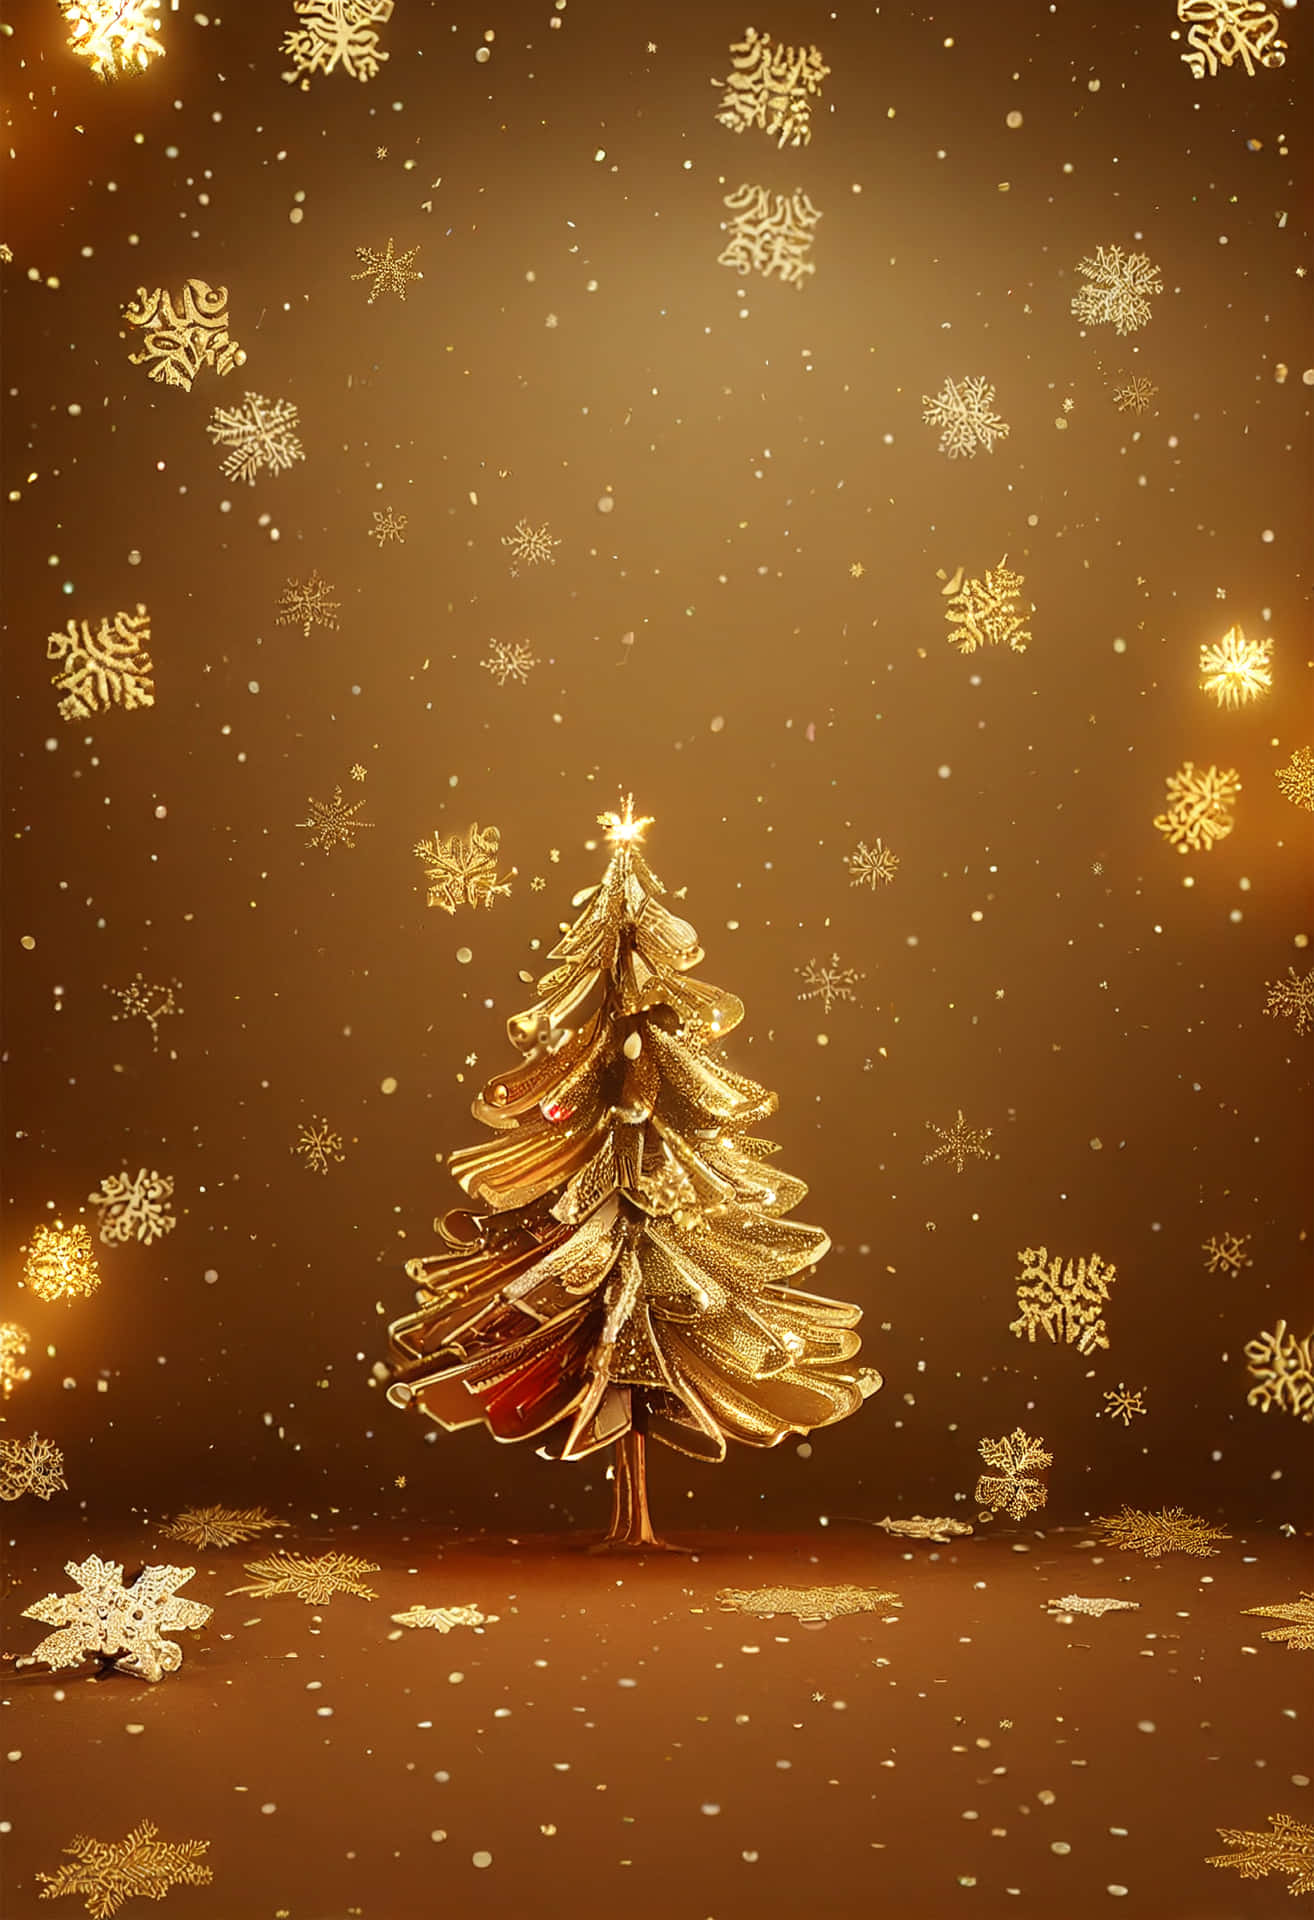 Download A Golden Christmas Tree On A Brown Background Wallpaper ...